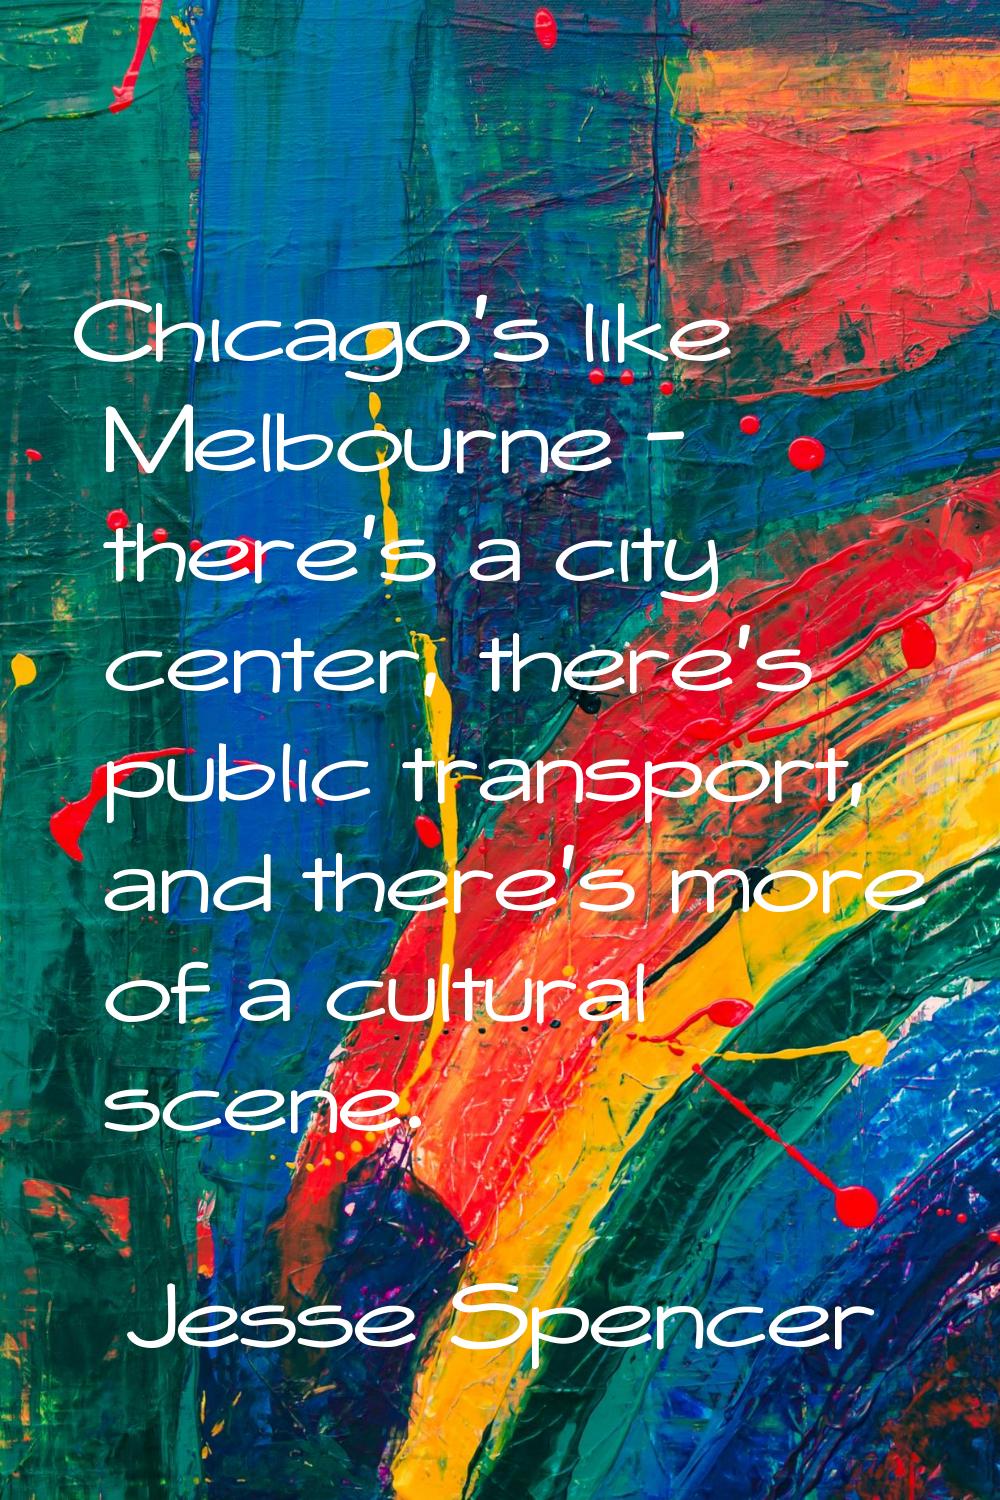 Chicago's like Melbourne - there's a city center, there's public transport, and there's more of a c